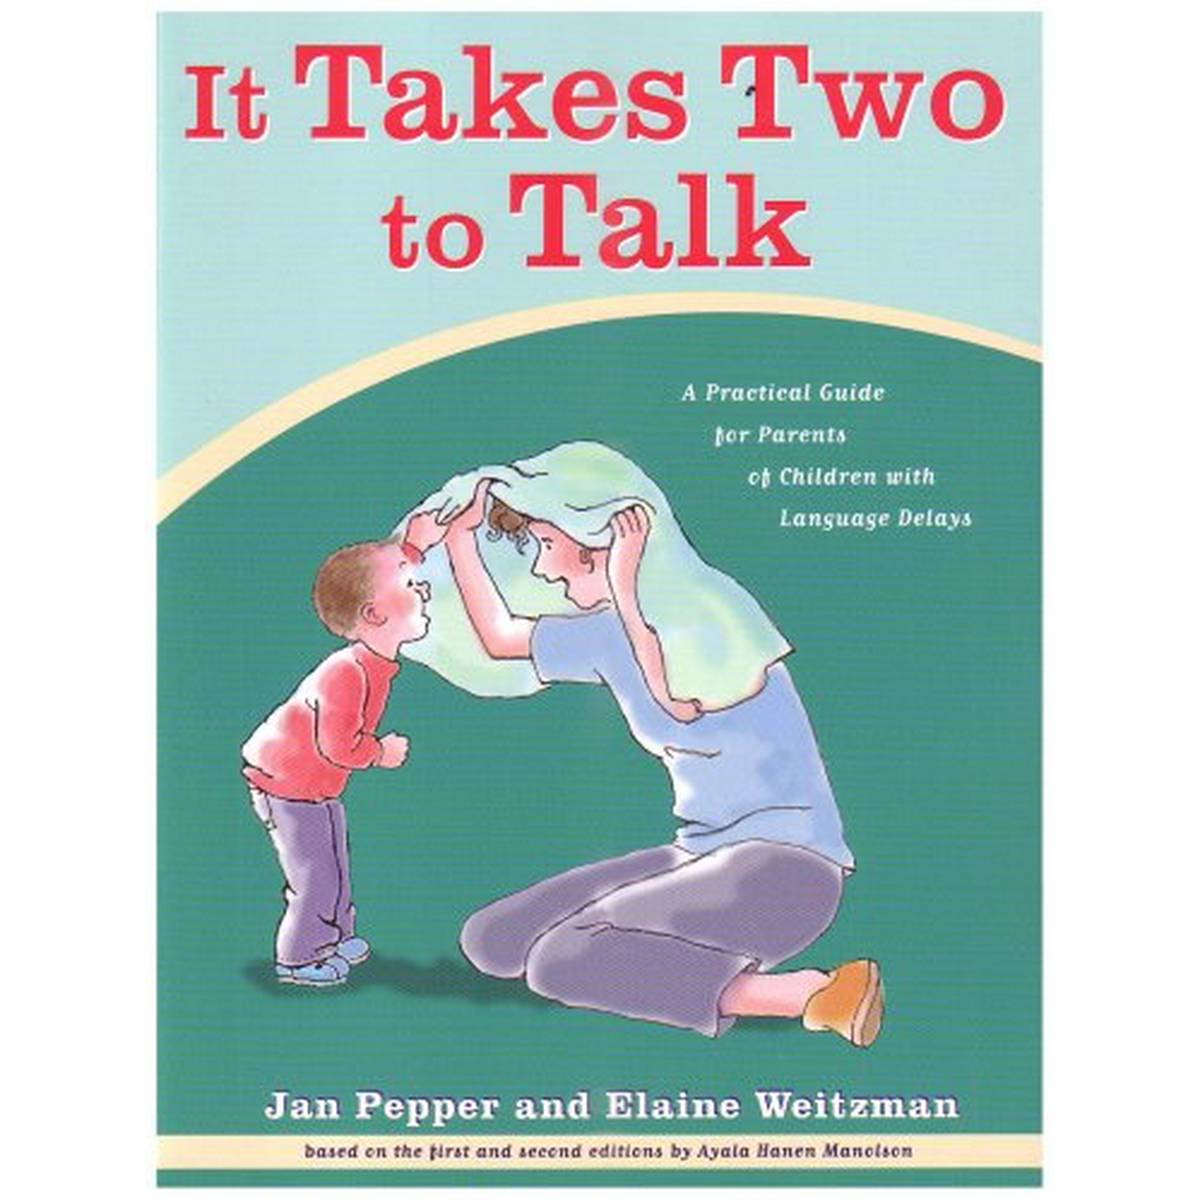 It Takes Two to Talk Guidebook: A Practical Guide for Parents of Children with Language Delays